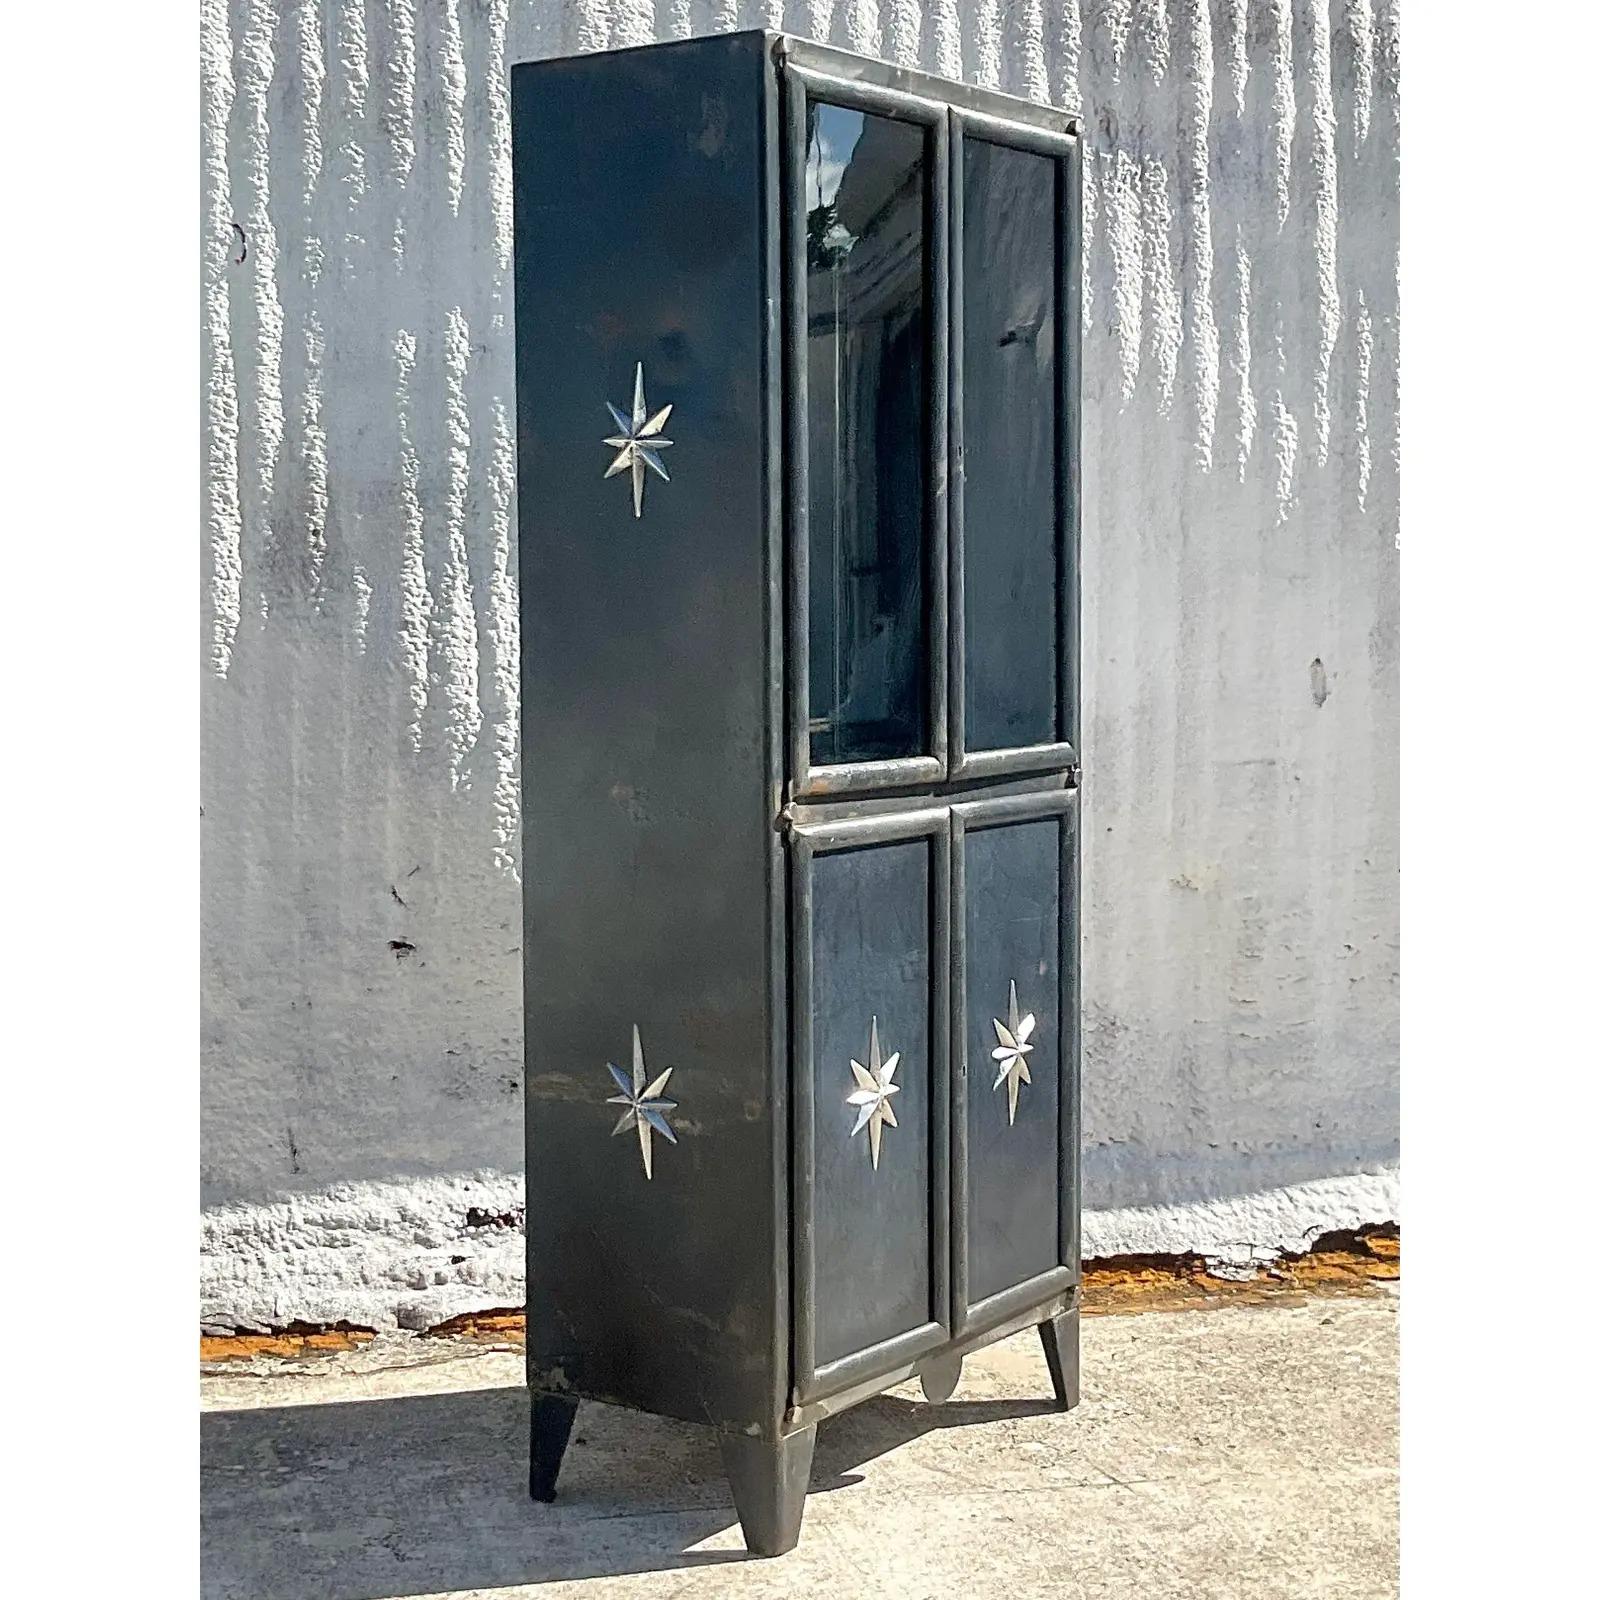 A fantastic vintage Boho metal storage cabinet. Fabulous silver stars adorn this black steel cabinet. Two separate sections with two glass shelves above and one below. Acquired from a Palm Beach estate.